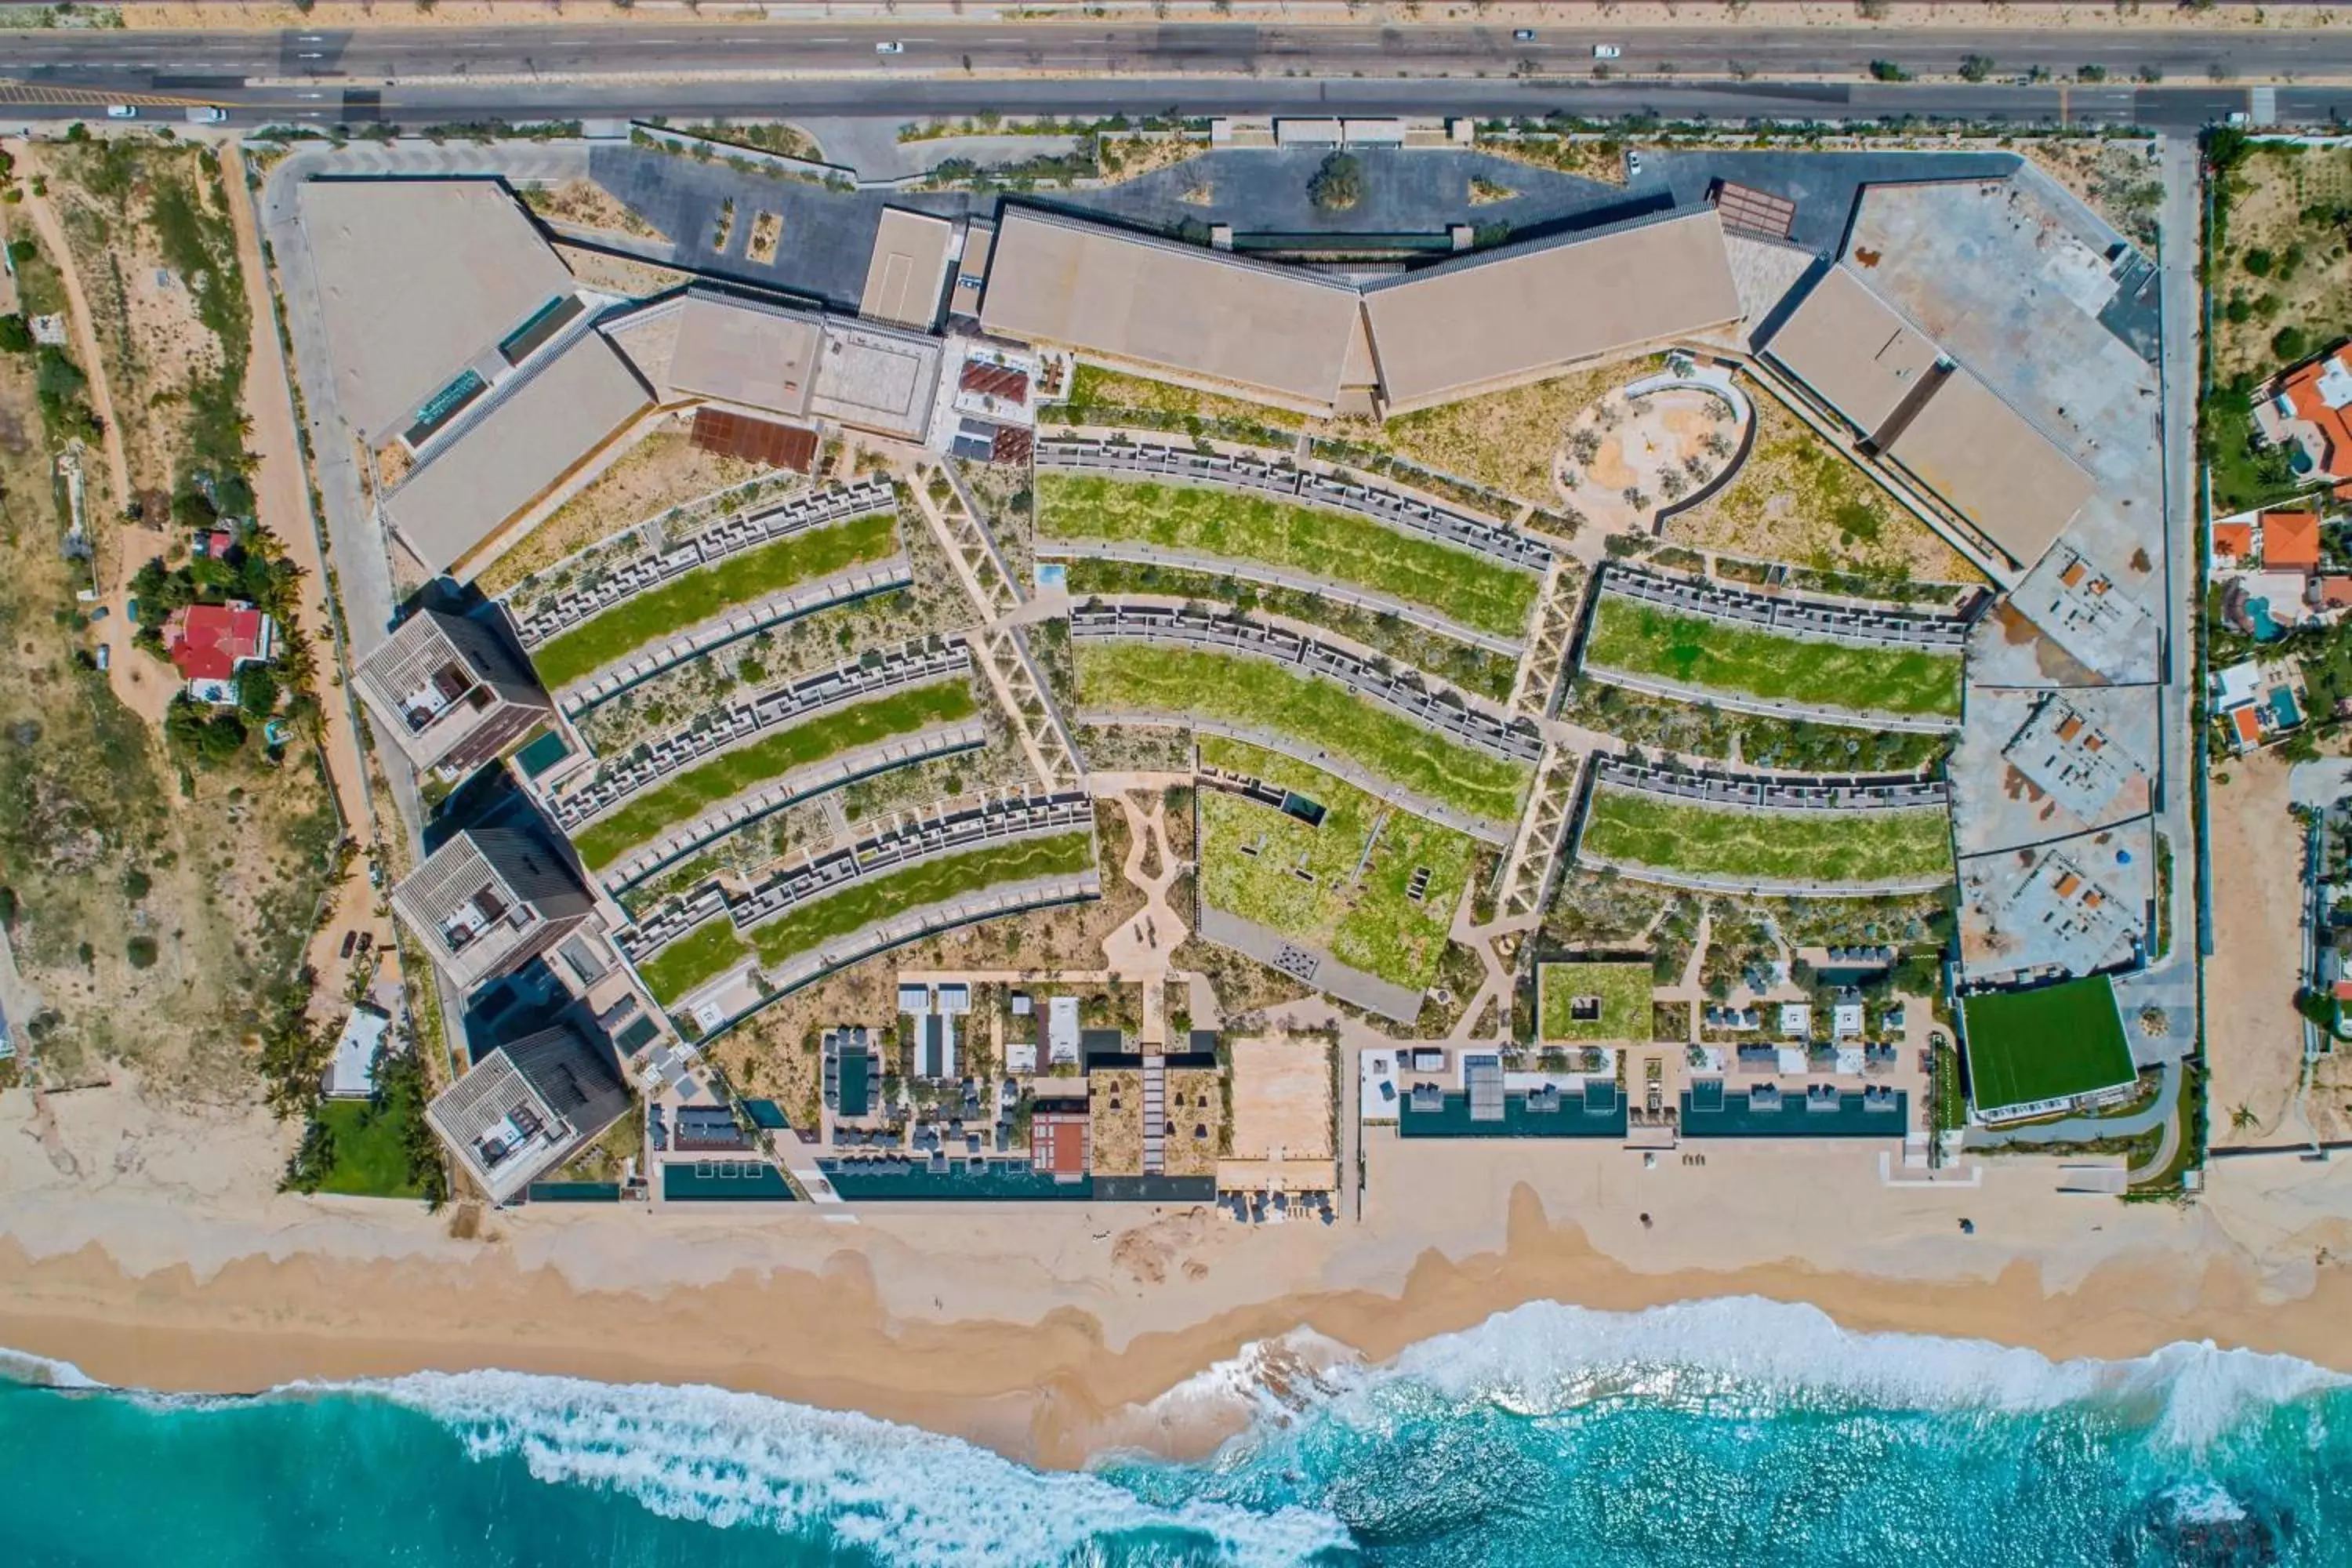 Property building, Bird's-eye View in Solaz, a Luxury Collection Resort, Los Cabos